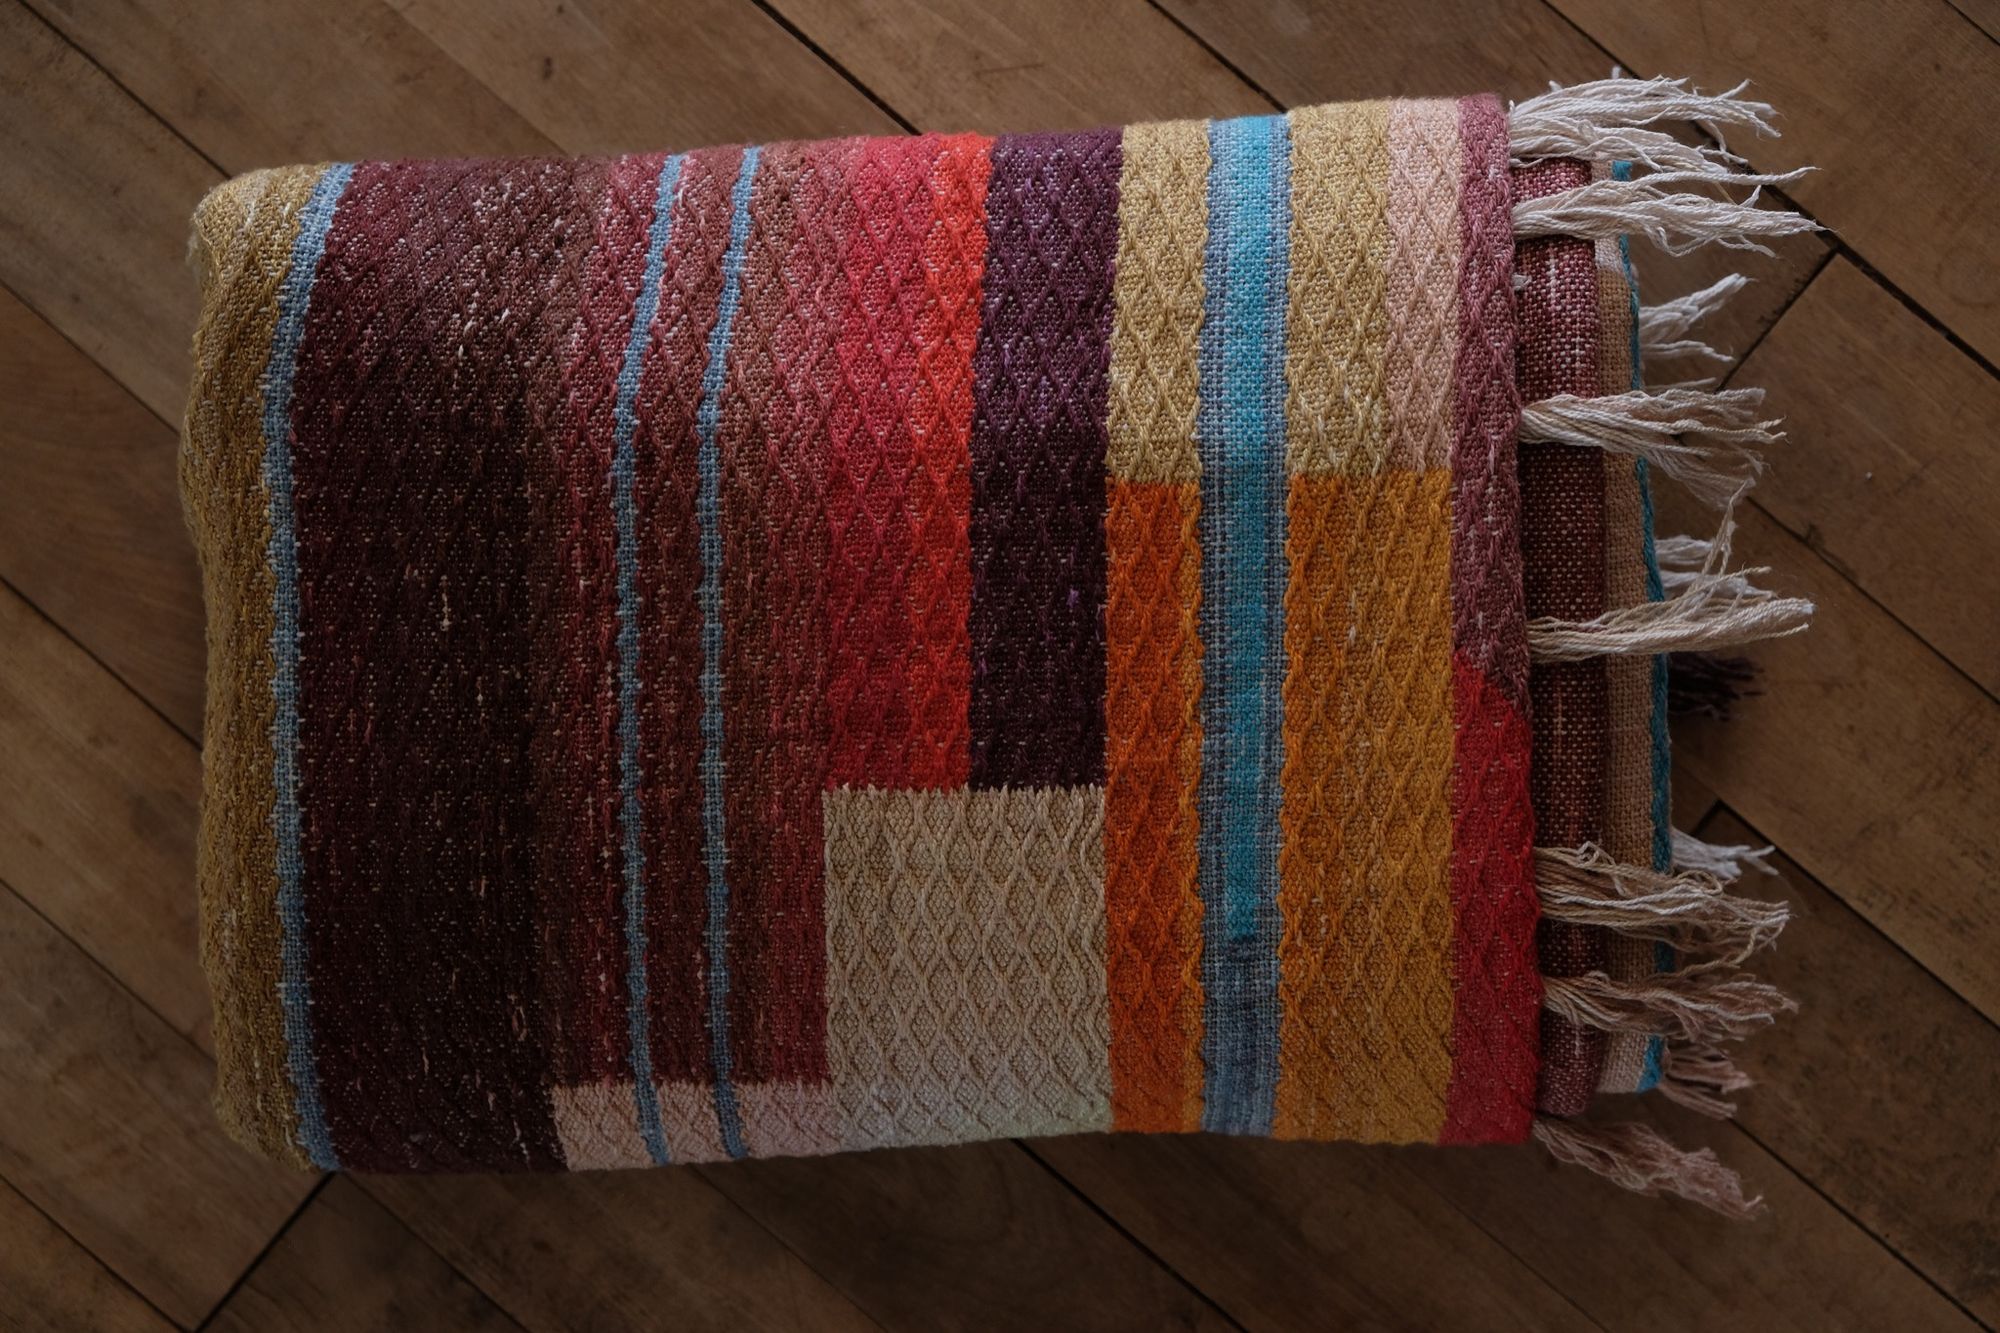 Handwoven fabric with a diamond texture pattern in natural browns, grey, purples, reds, turquoise, yellow, orange and pink. It is folded on a wooden floor.